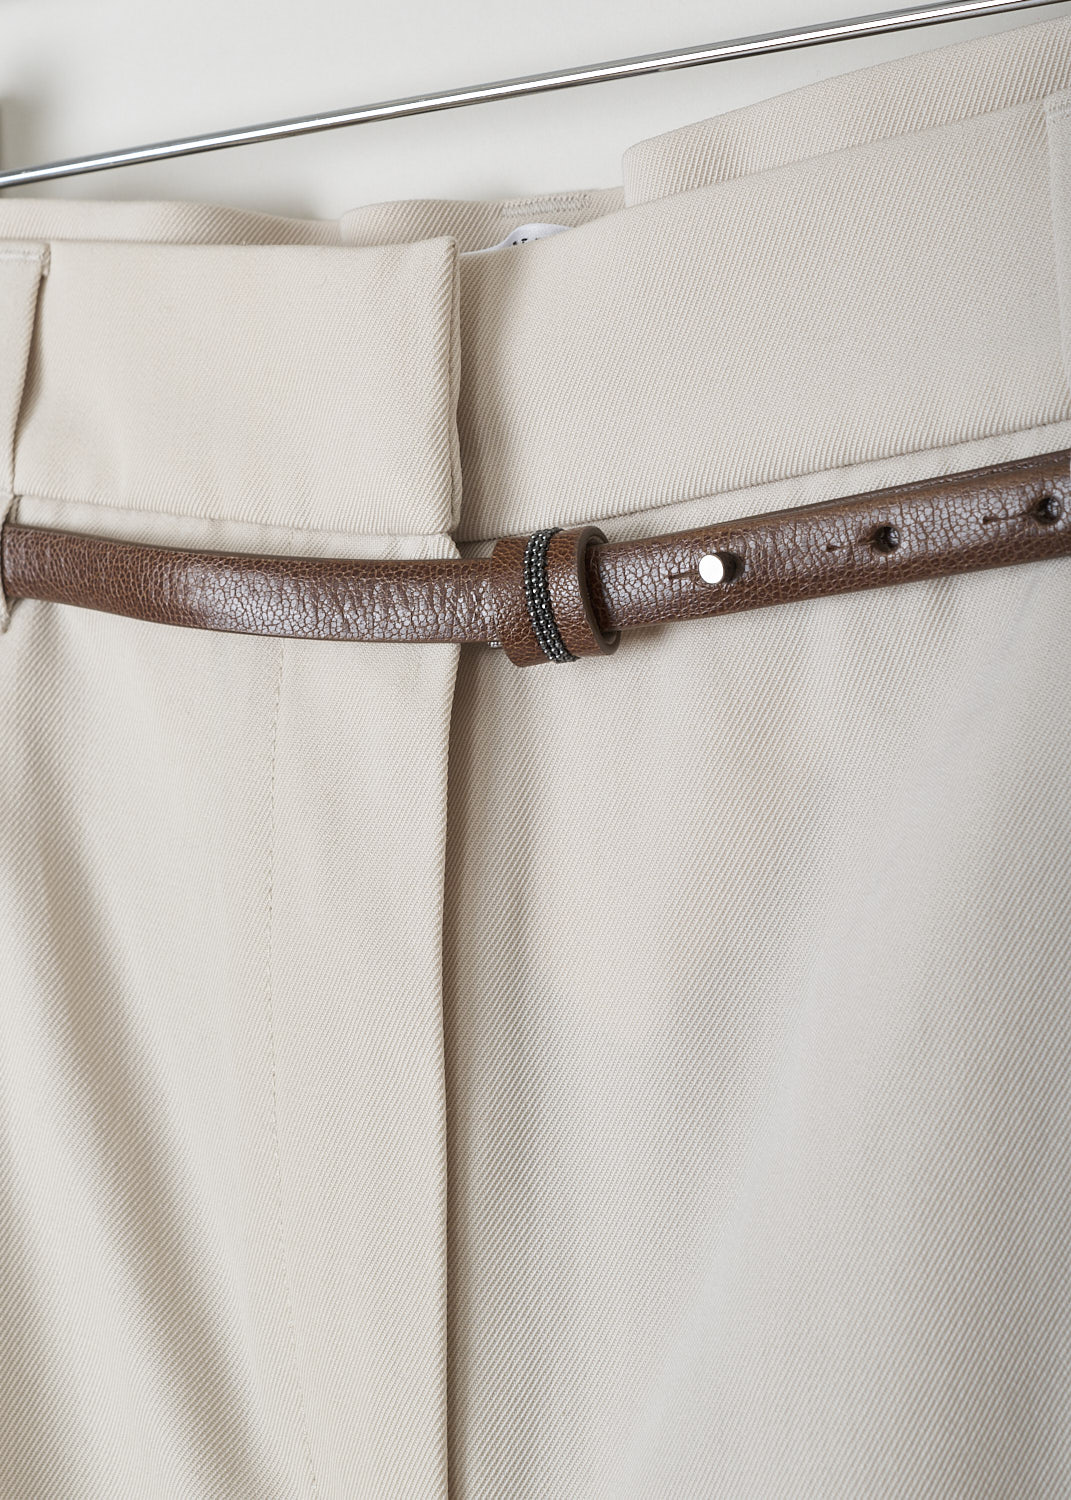 BRUNELLO CUCINELLI, BEIGE PANTS WITH TAPERED LEGS, MA033P7379_C8501, Beige, Detail 1, These beige pleated pants have a half elasticated waistband. The waistband has both broad and a narrow belt loops and comes with a brown leather belt through the narrow belt loops. A concealed snap button and zipper function as the closure option. These pants have a pleated front with tapered pant legs. Slanted pockets can be found in the front and welt pockets in the back.  
